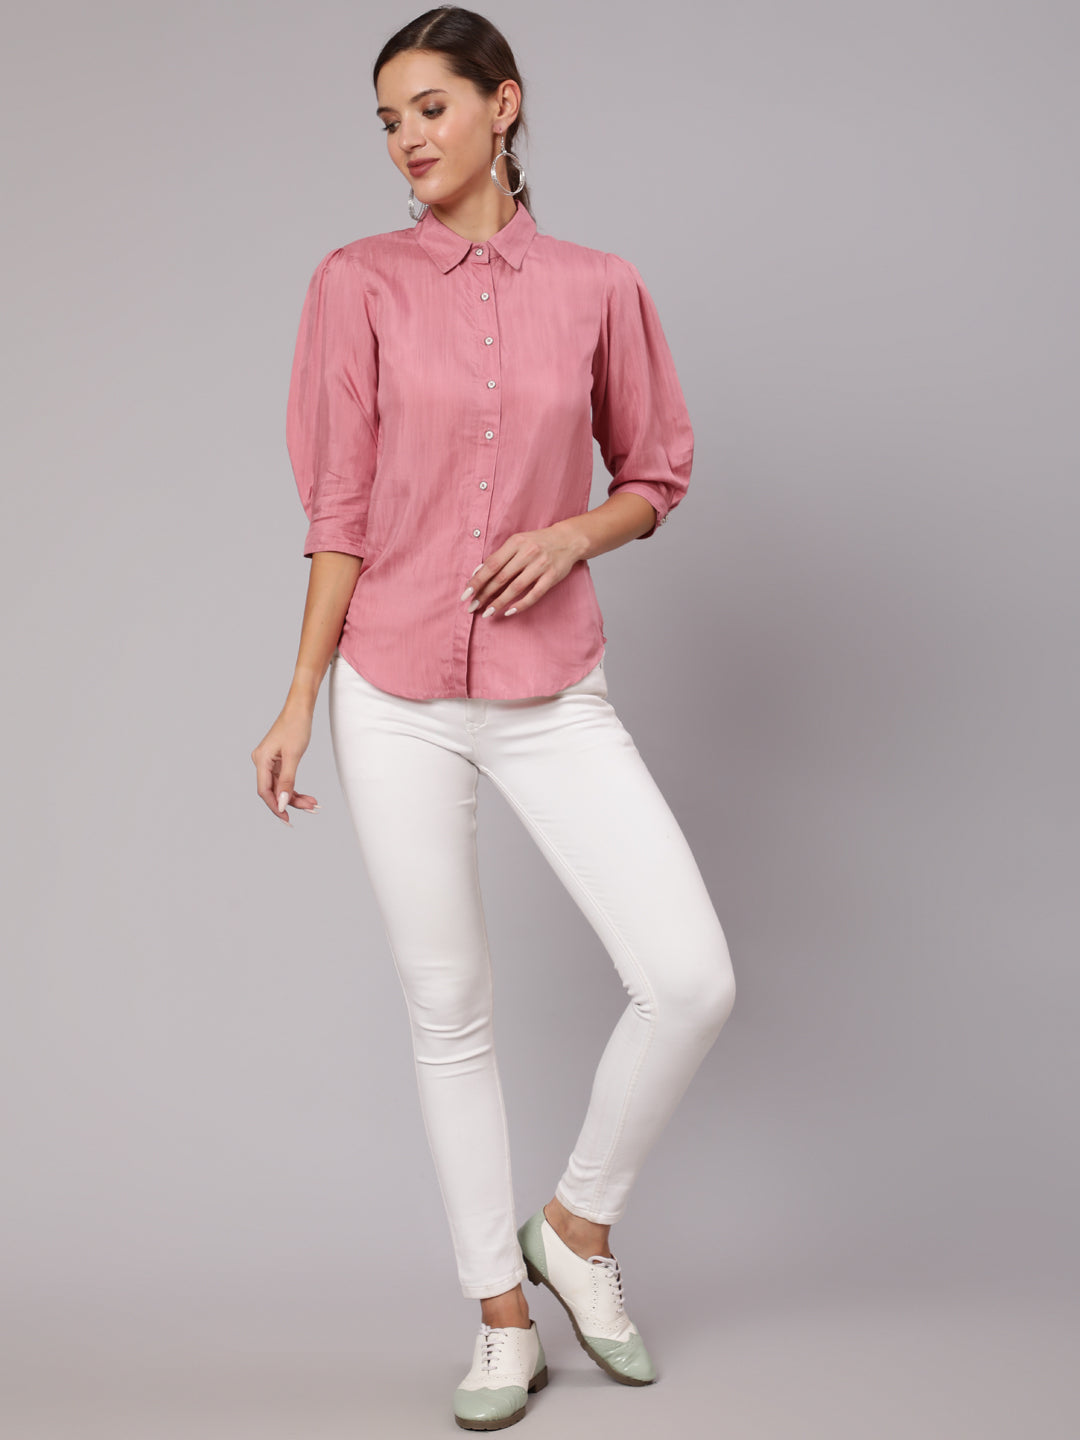 Pink Color Solid Silk Blend Shirt With Front Opening, Has Three-Fourth Puffed Sleeves, Buttons For Closure And A Curved Hem.